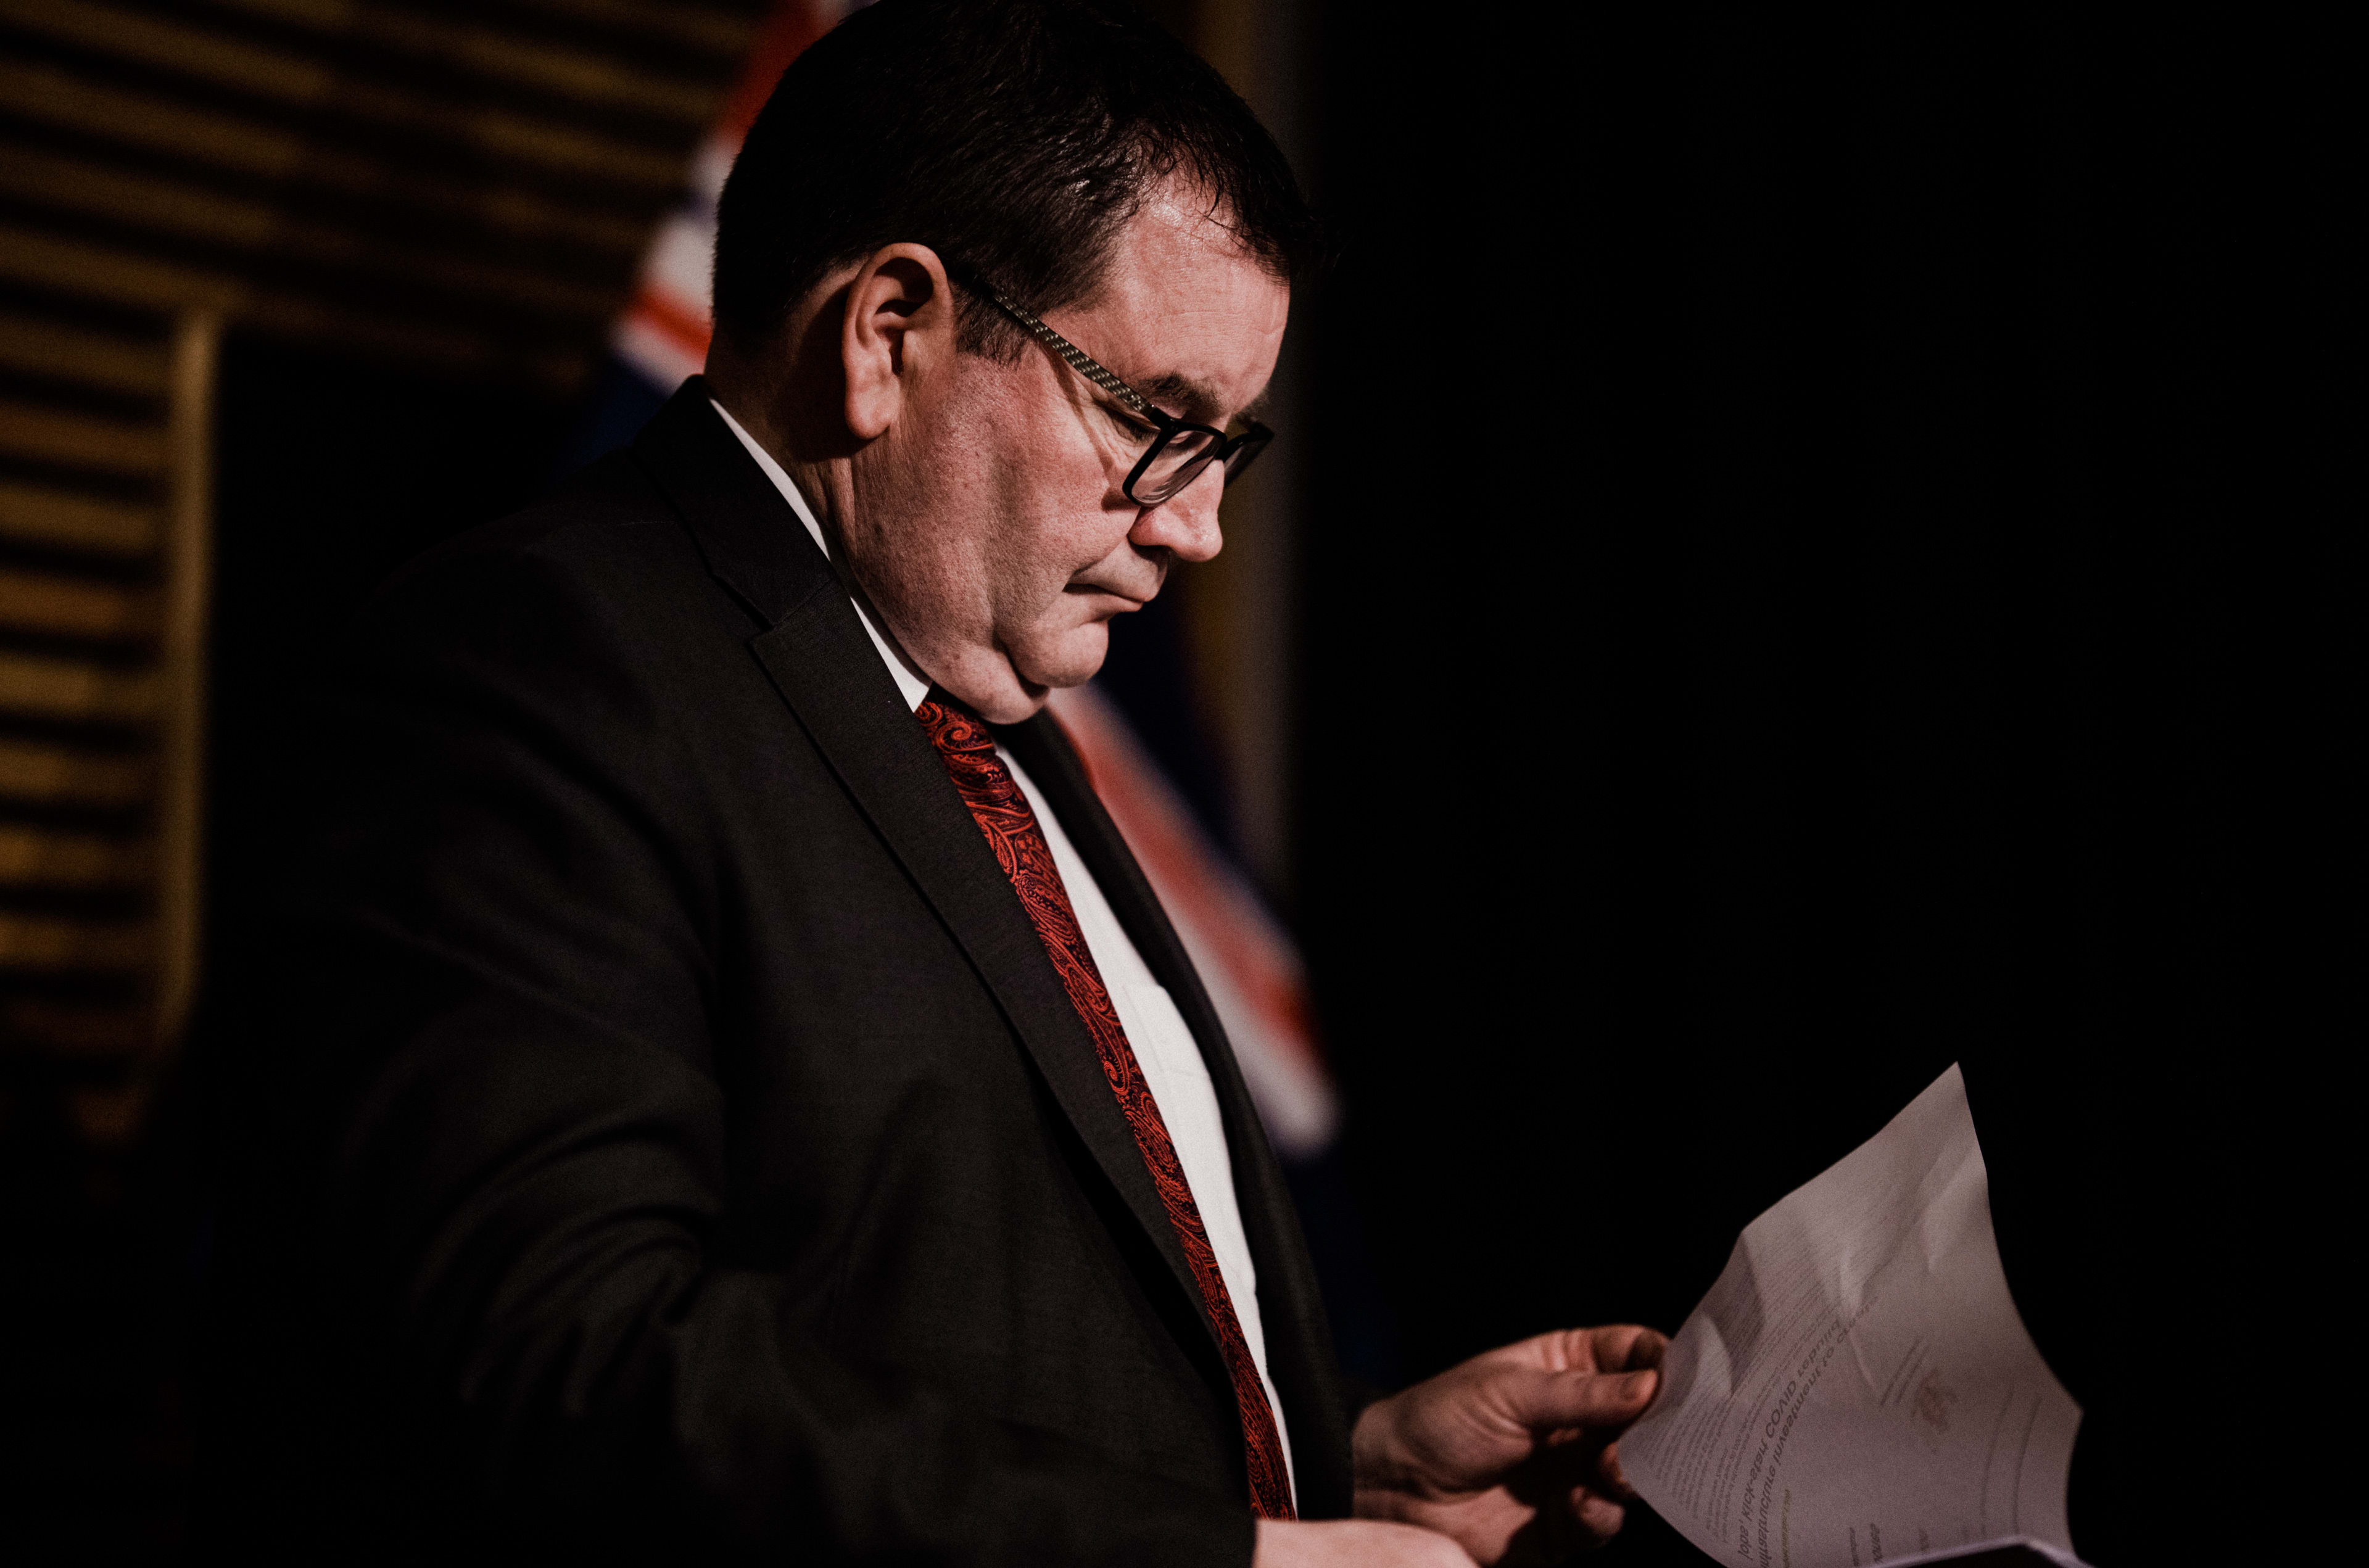 Minister of Finance Grant Robertson at the infrastructure announcement on 1 July, 2020.